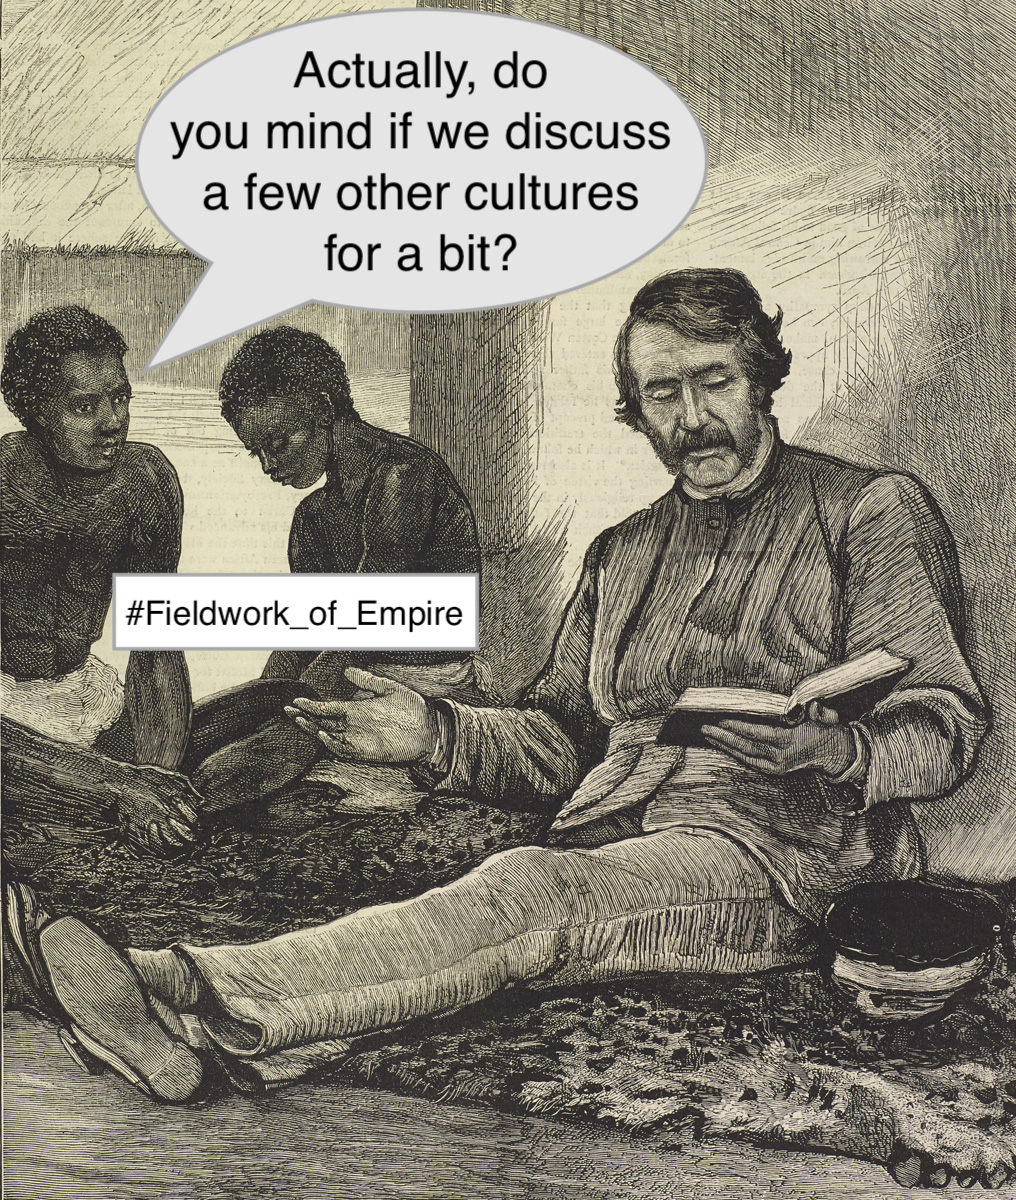 Fieldwork of Empire, meme #11. Image: “Dr. Livingstone Reading the Bible to His Men.” Illustration from “The Life and Labours of David Livingstone,” The Graphic, 25 April 1874, 303 Meme text: “'Actually, do you mind if we discuss a few other cultures for a bit?'” Images copyright National Library of Scotland. Creative Commons Share-alike 2.5 UK: Scotland (https://creativecommons.org/licenses/by-nc-sa/2.5/scotland/). Meme copyright Adrian S. Wisnicki. Creative Commons Attribution-NonCommercial 3.0 Unported (https://creativecommons.org/licenses/by-nc/3.0/).